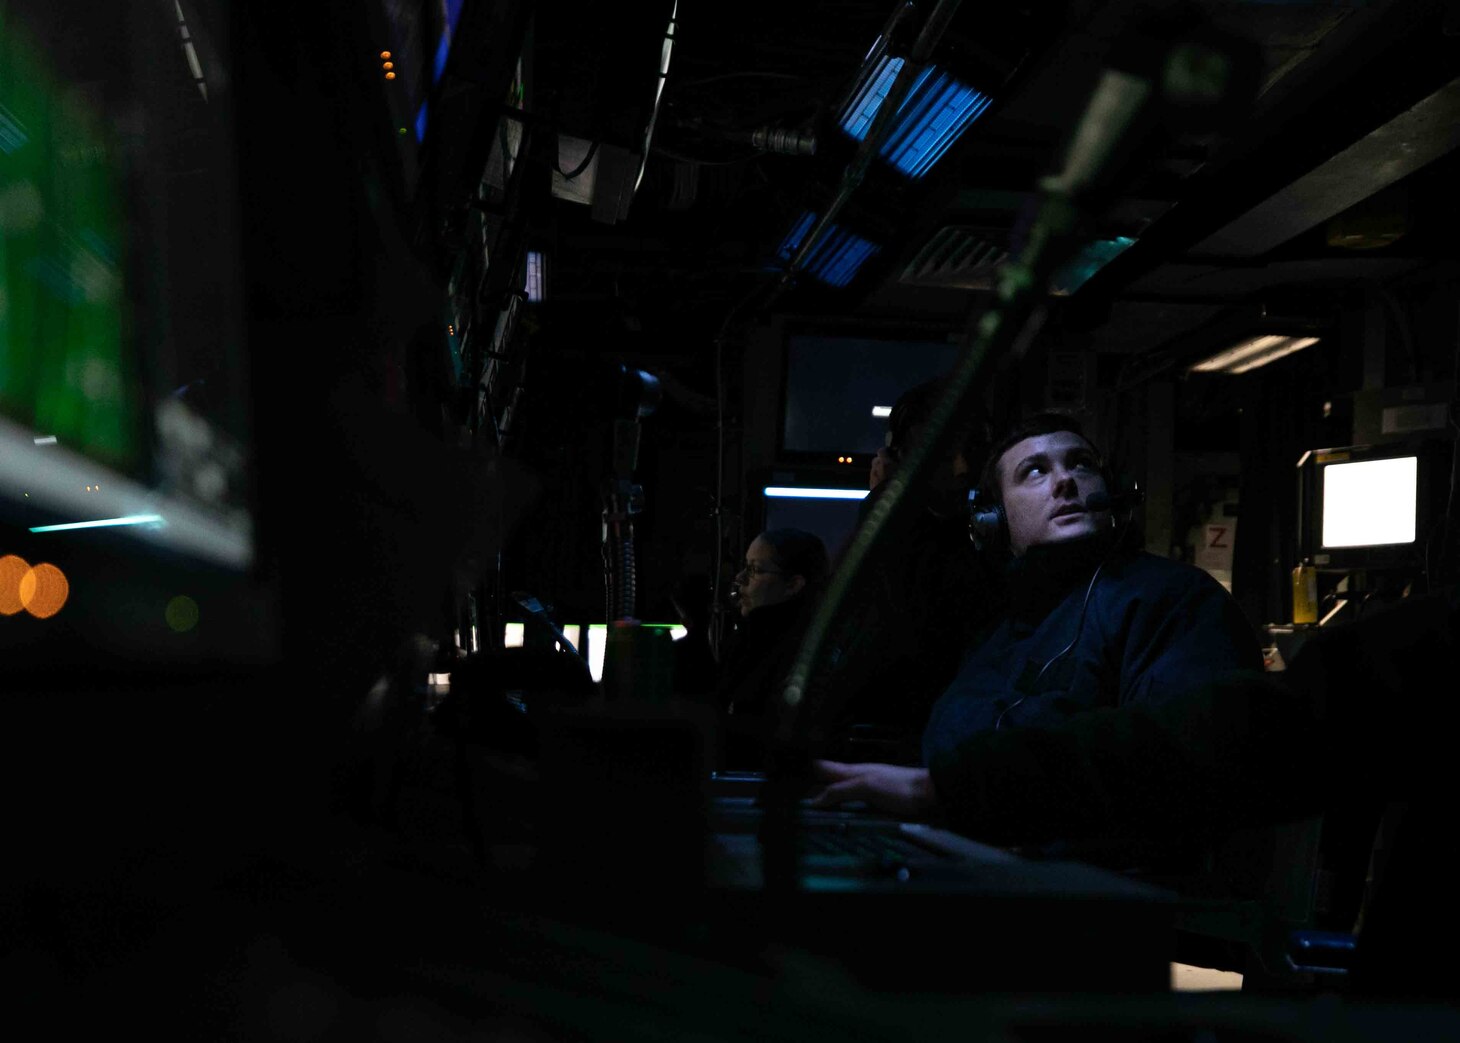 (March 8, 2023) Sonar Technician (surface) 2nd Class Corey Miller scans beams to search for underwater contacts aboard aboard the Arleigh Burke-class guided-missile destroyer USS Arleigh Burke (DDG 51) during exercise Joint Warrior 23-1, March 8, 2023. Arleigh Burke is on a scheduled deployment in the U.S. Naval Forces Europe area of operations, employed by U.S. Sixth Fleet to defend U.S., allied and partner interests.